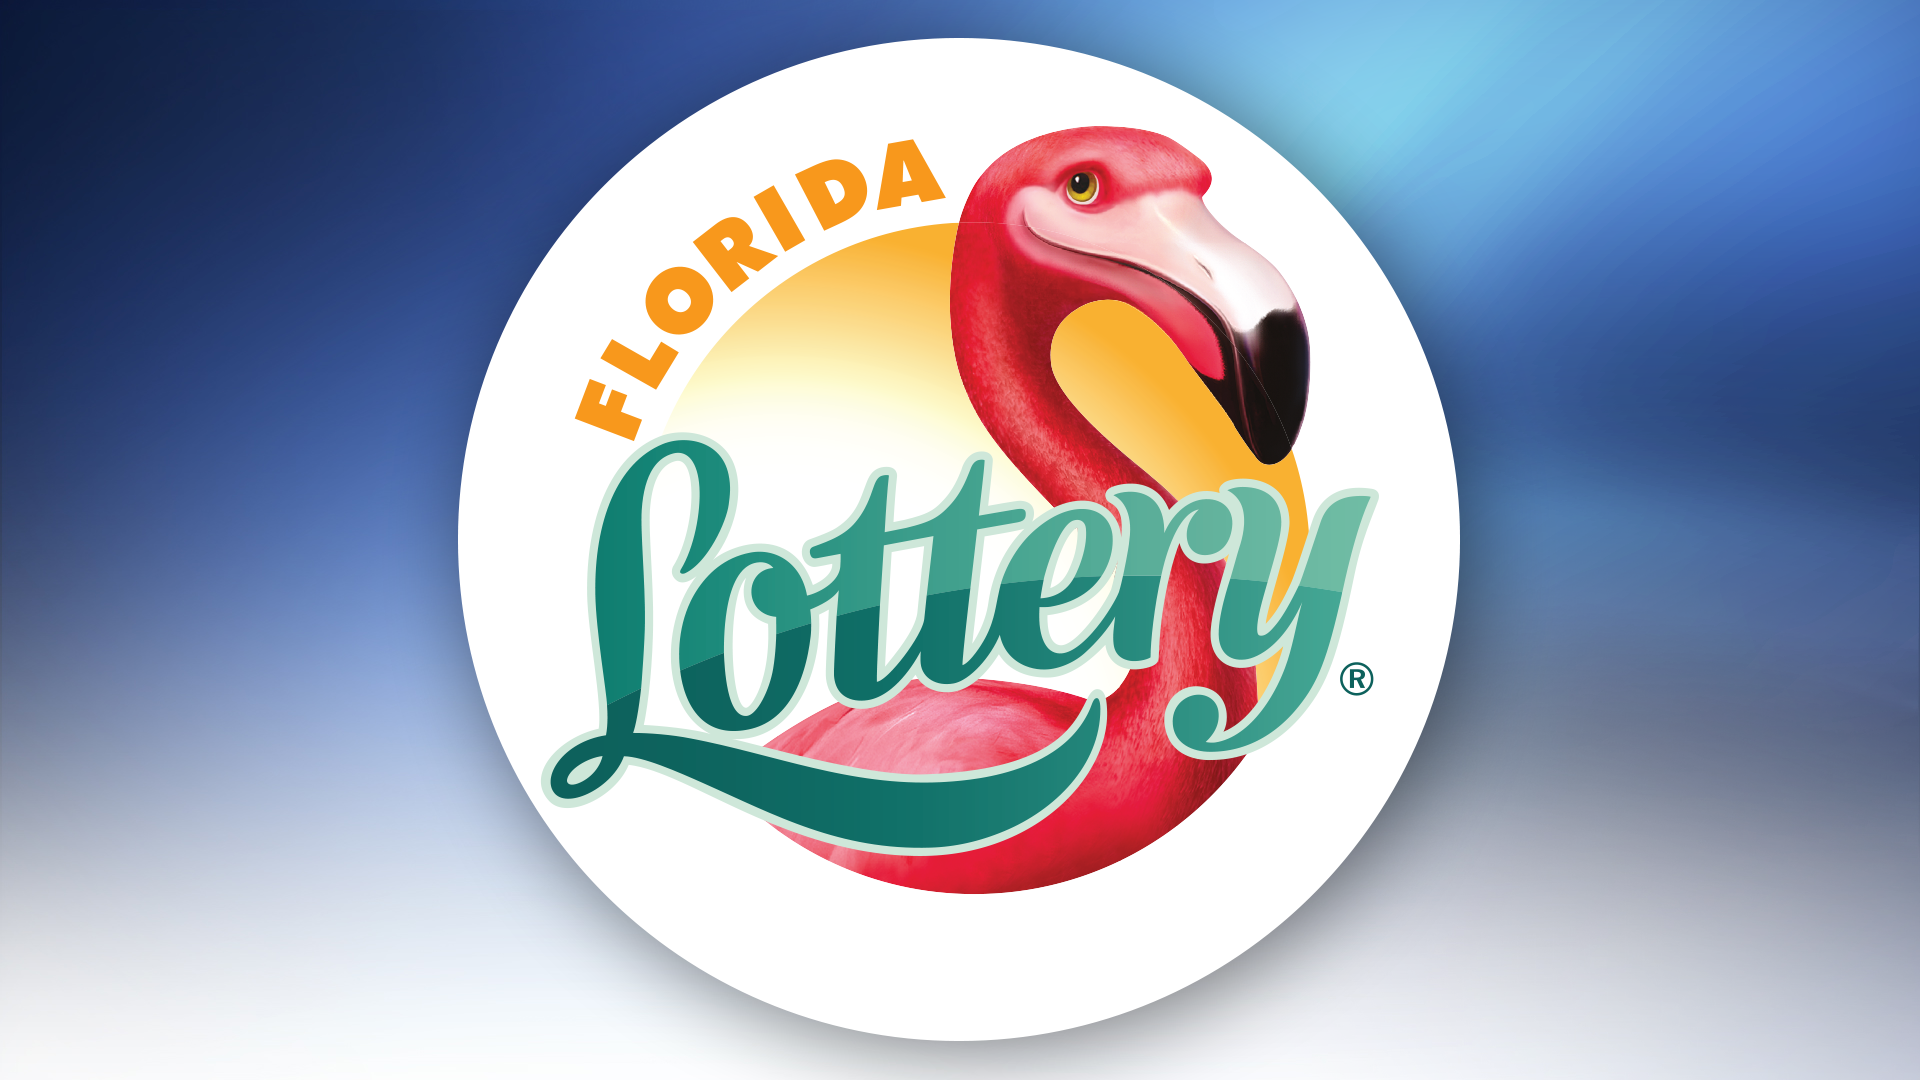 DeLand man wins Florida Lottery's 'Fastest Road to $1,000,000' game